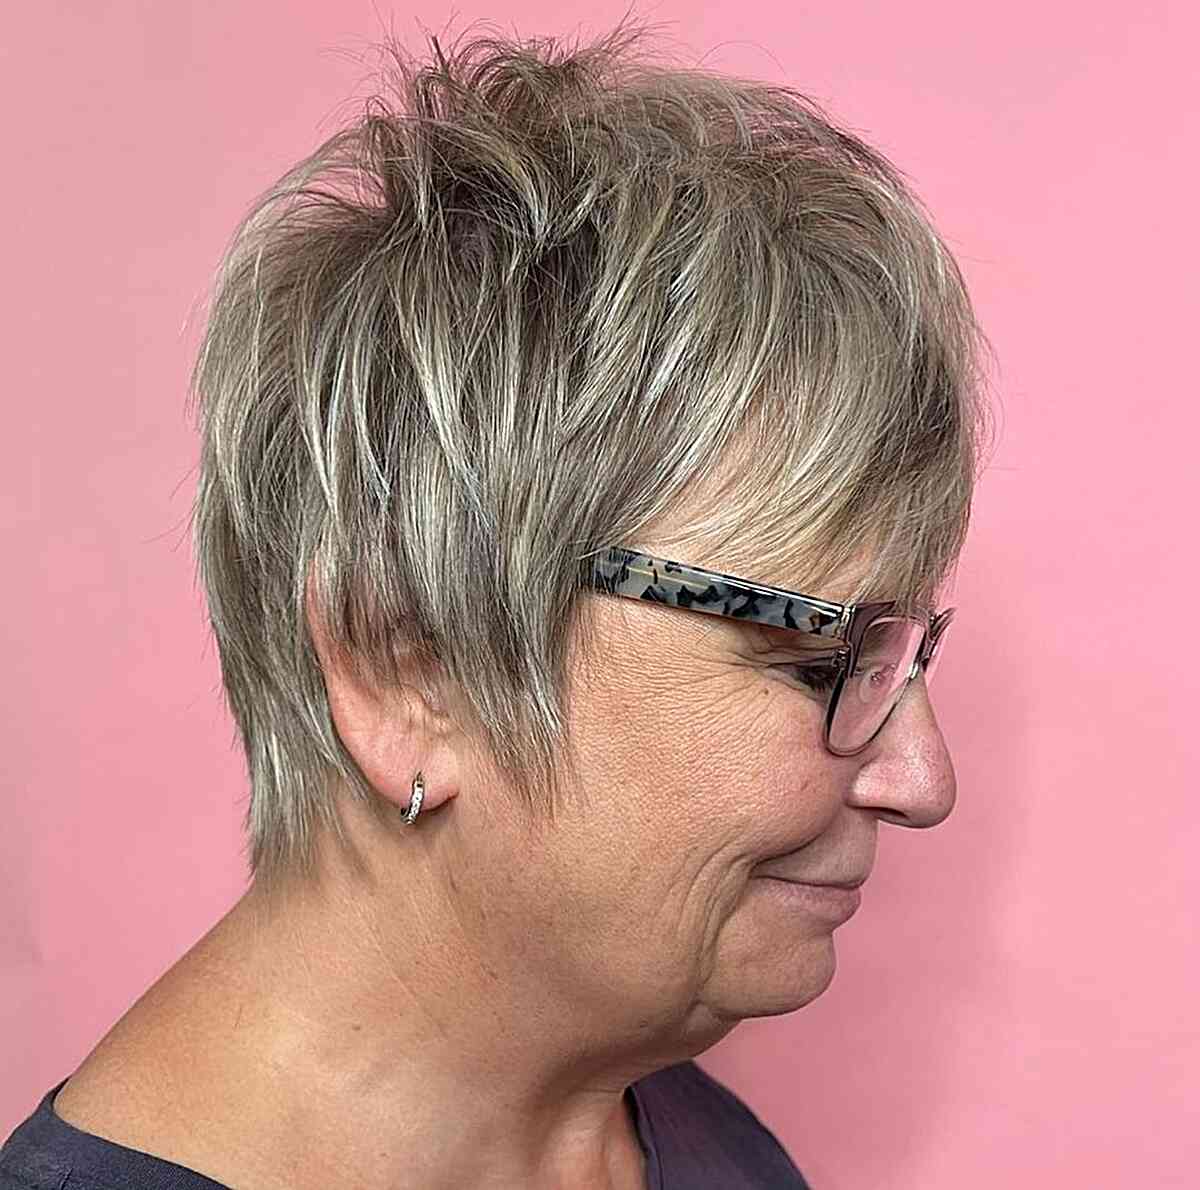 Dimensional Shaggy Pixie for older women with glasses and aging hair